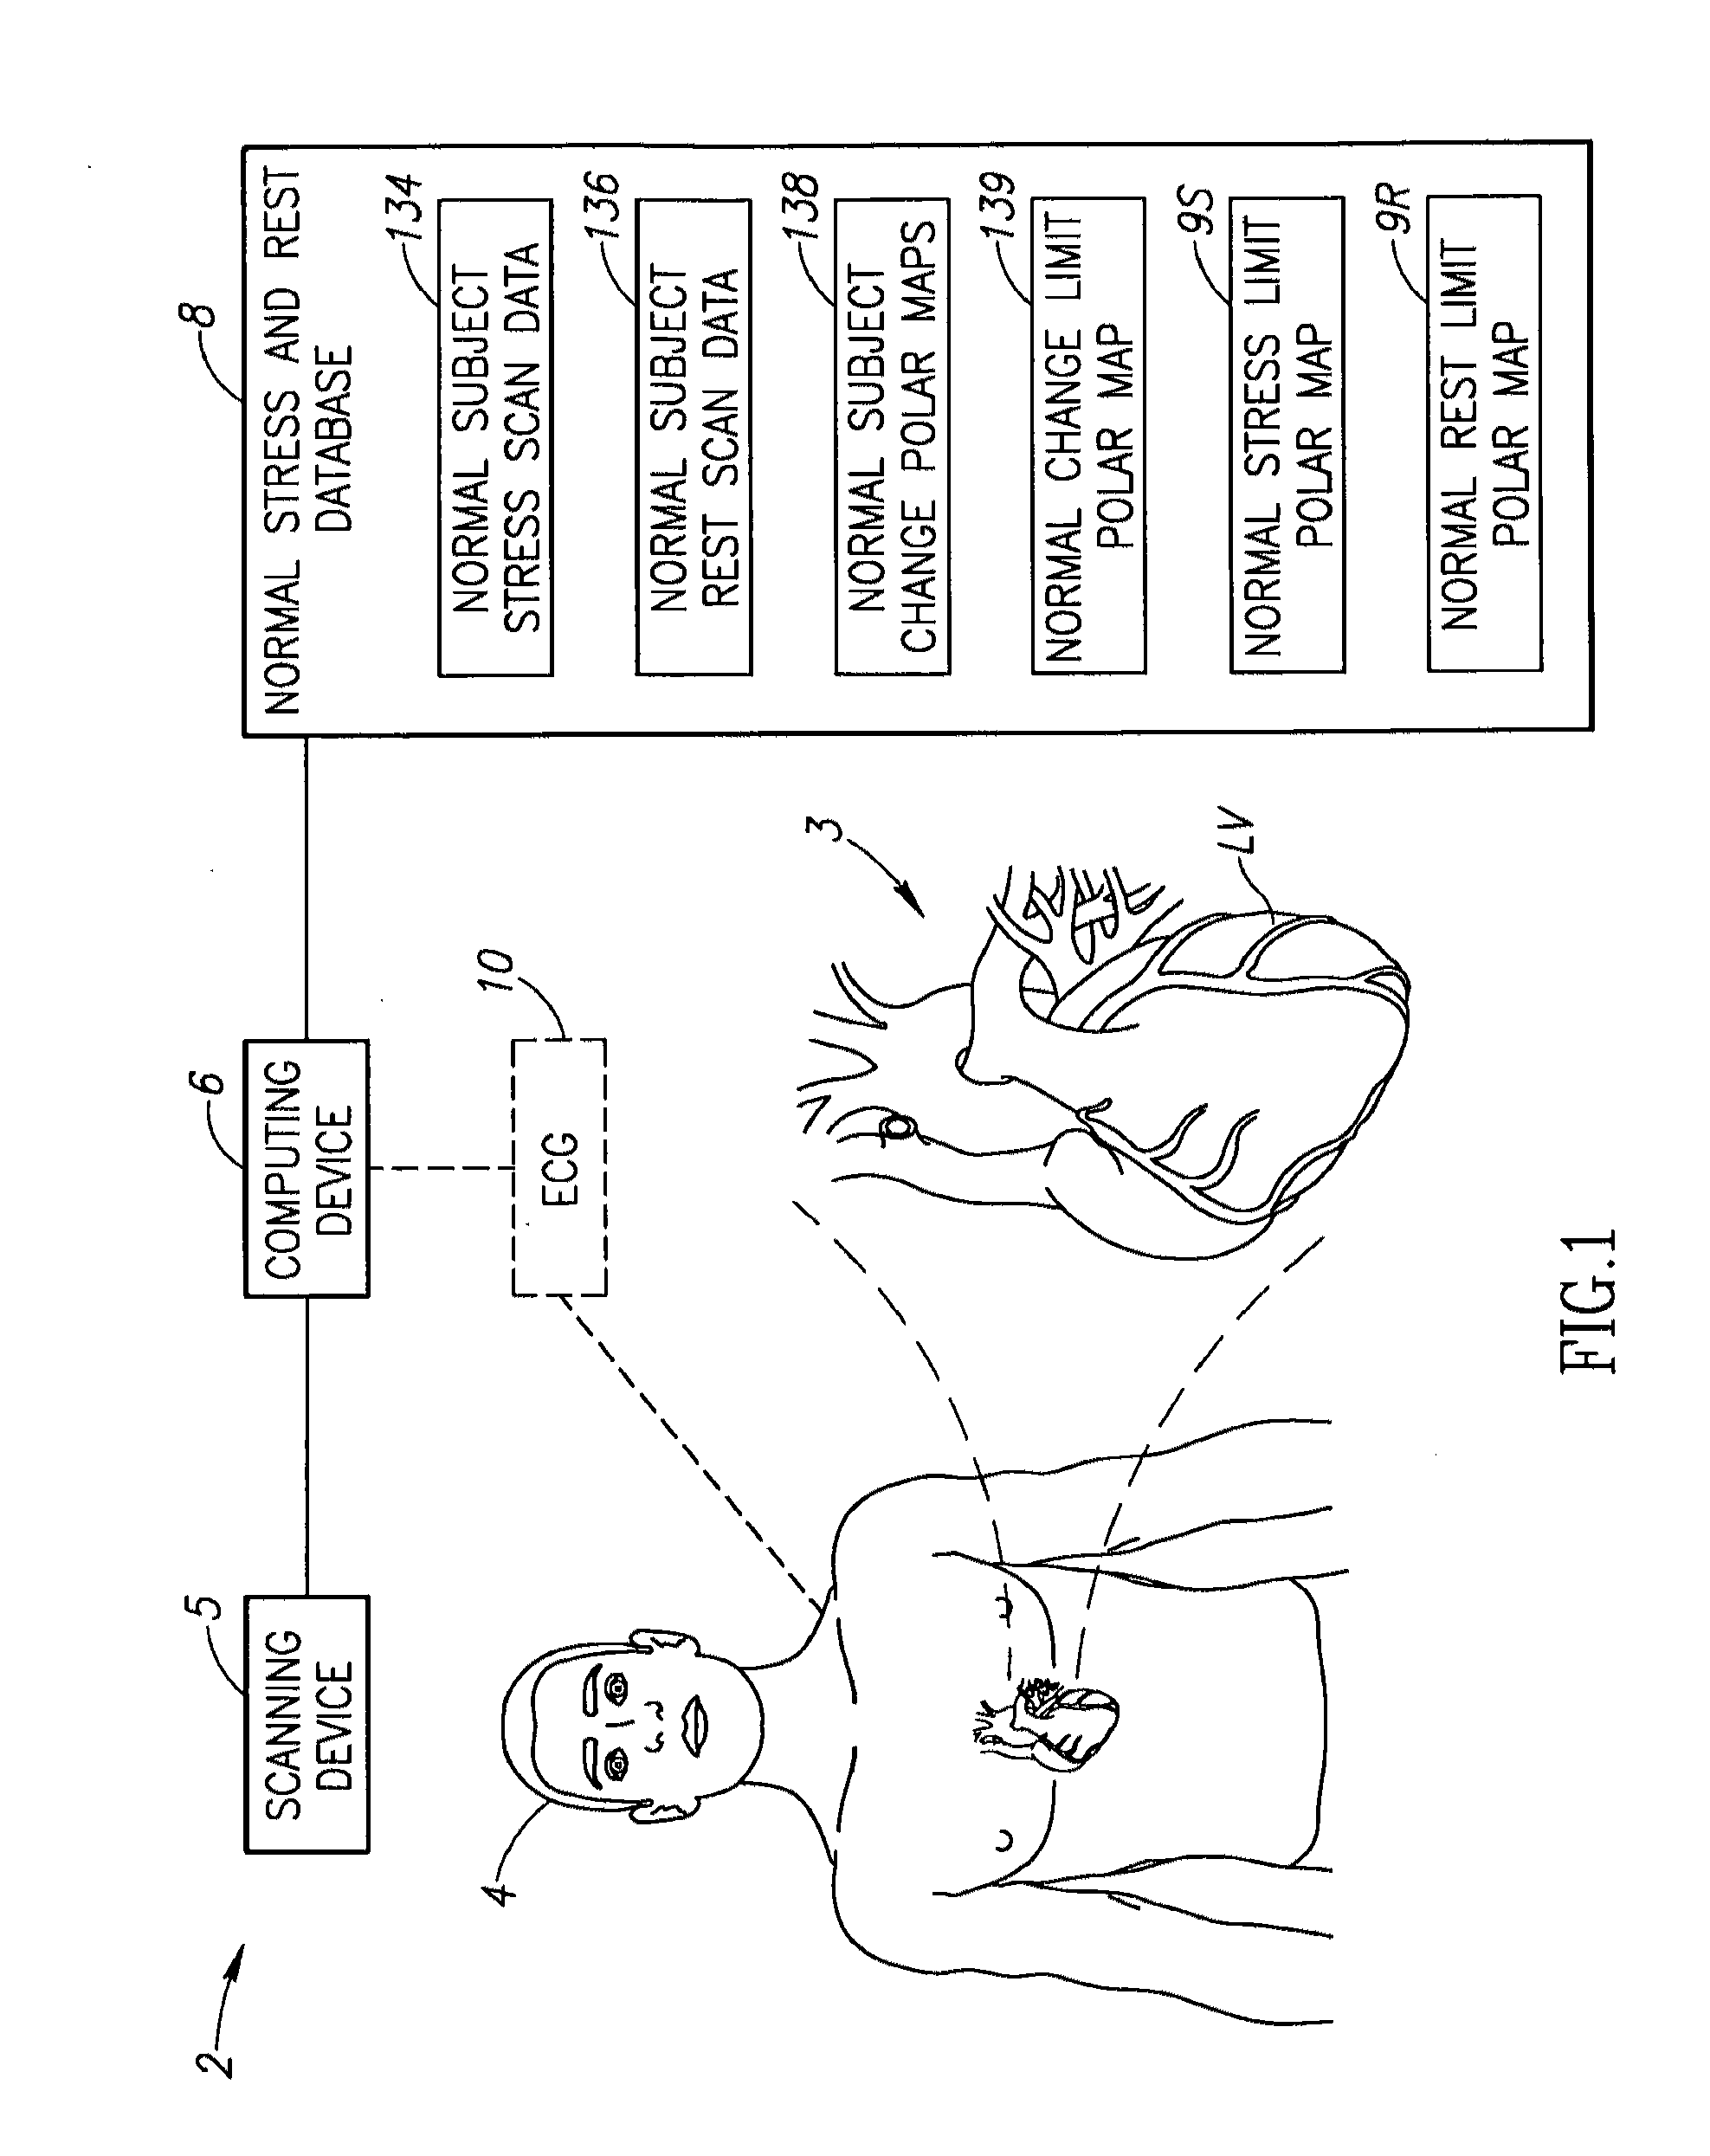 Method of determining ischemia using paired stress and rest scans